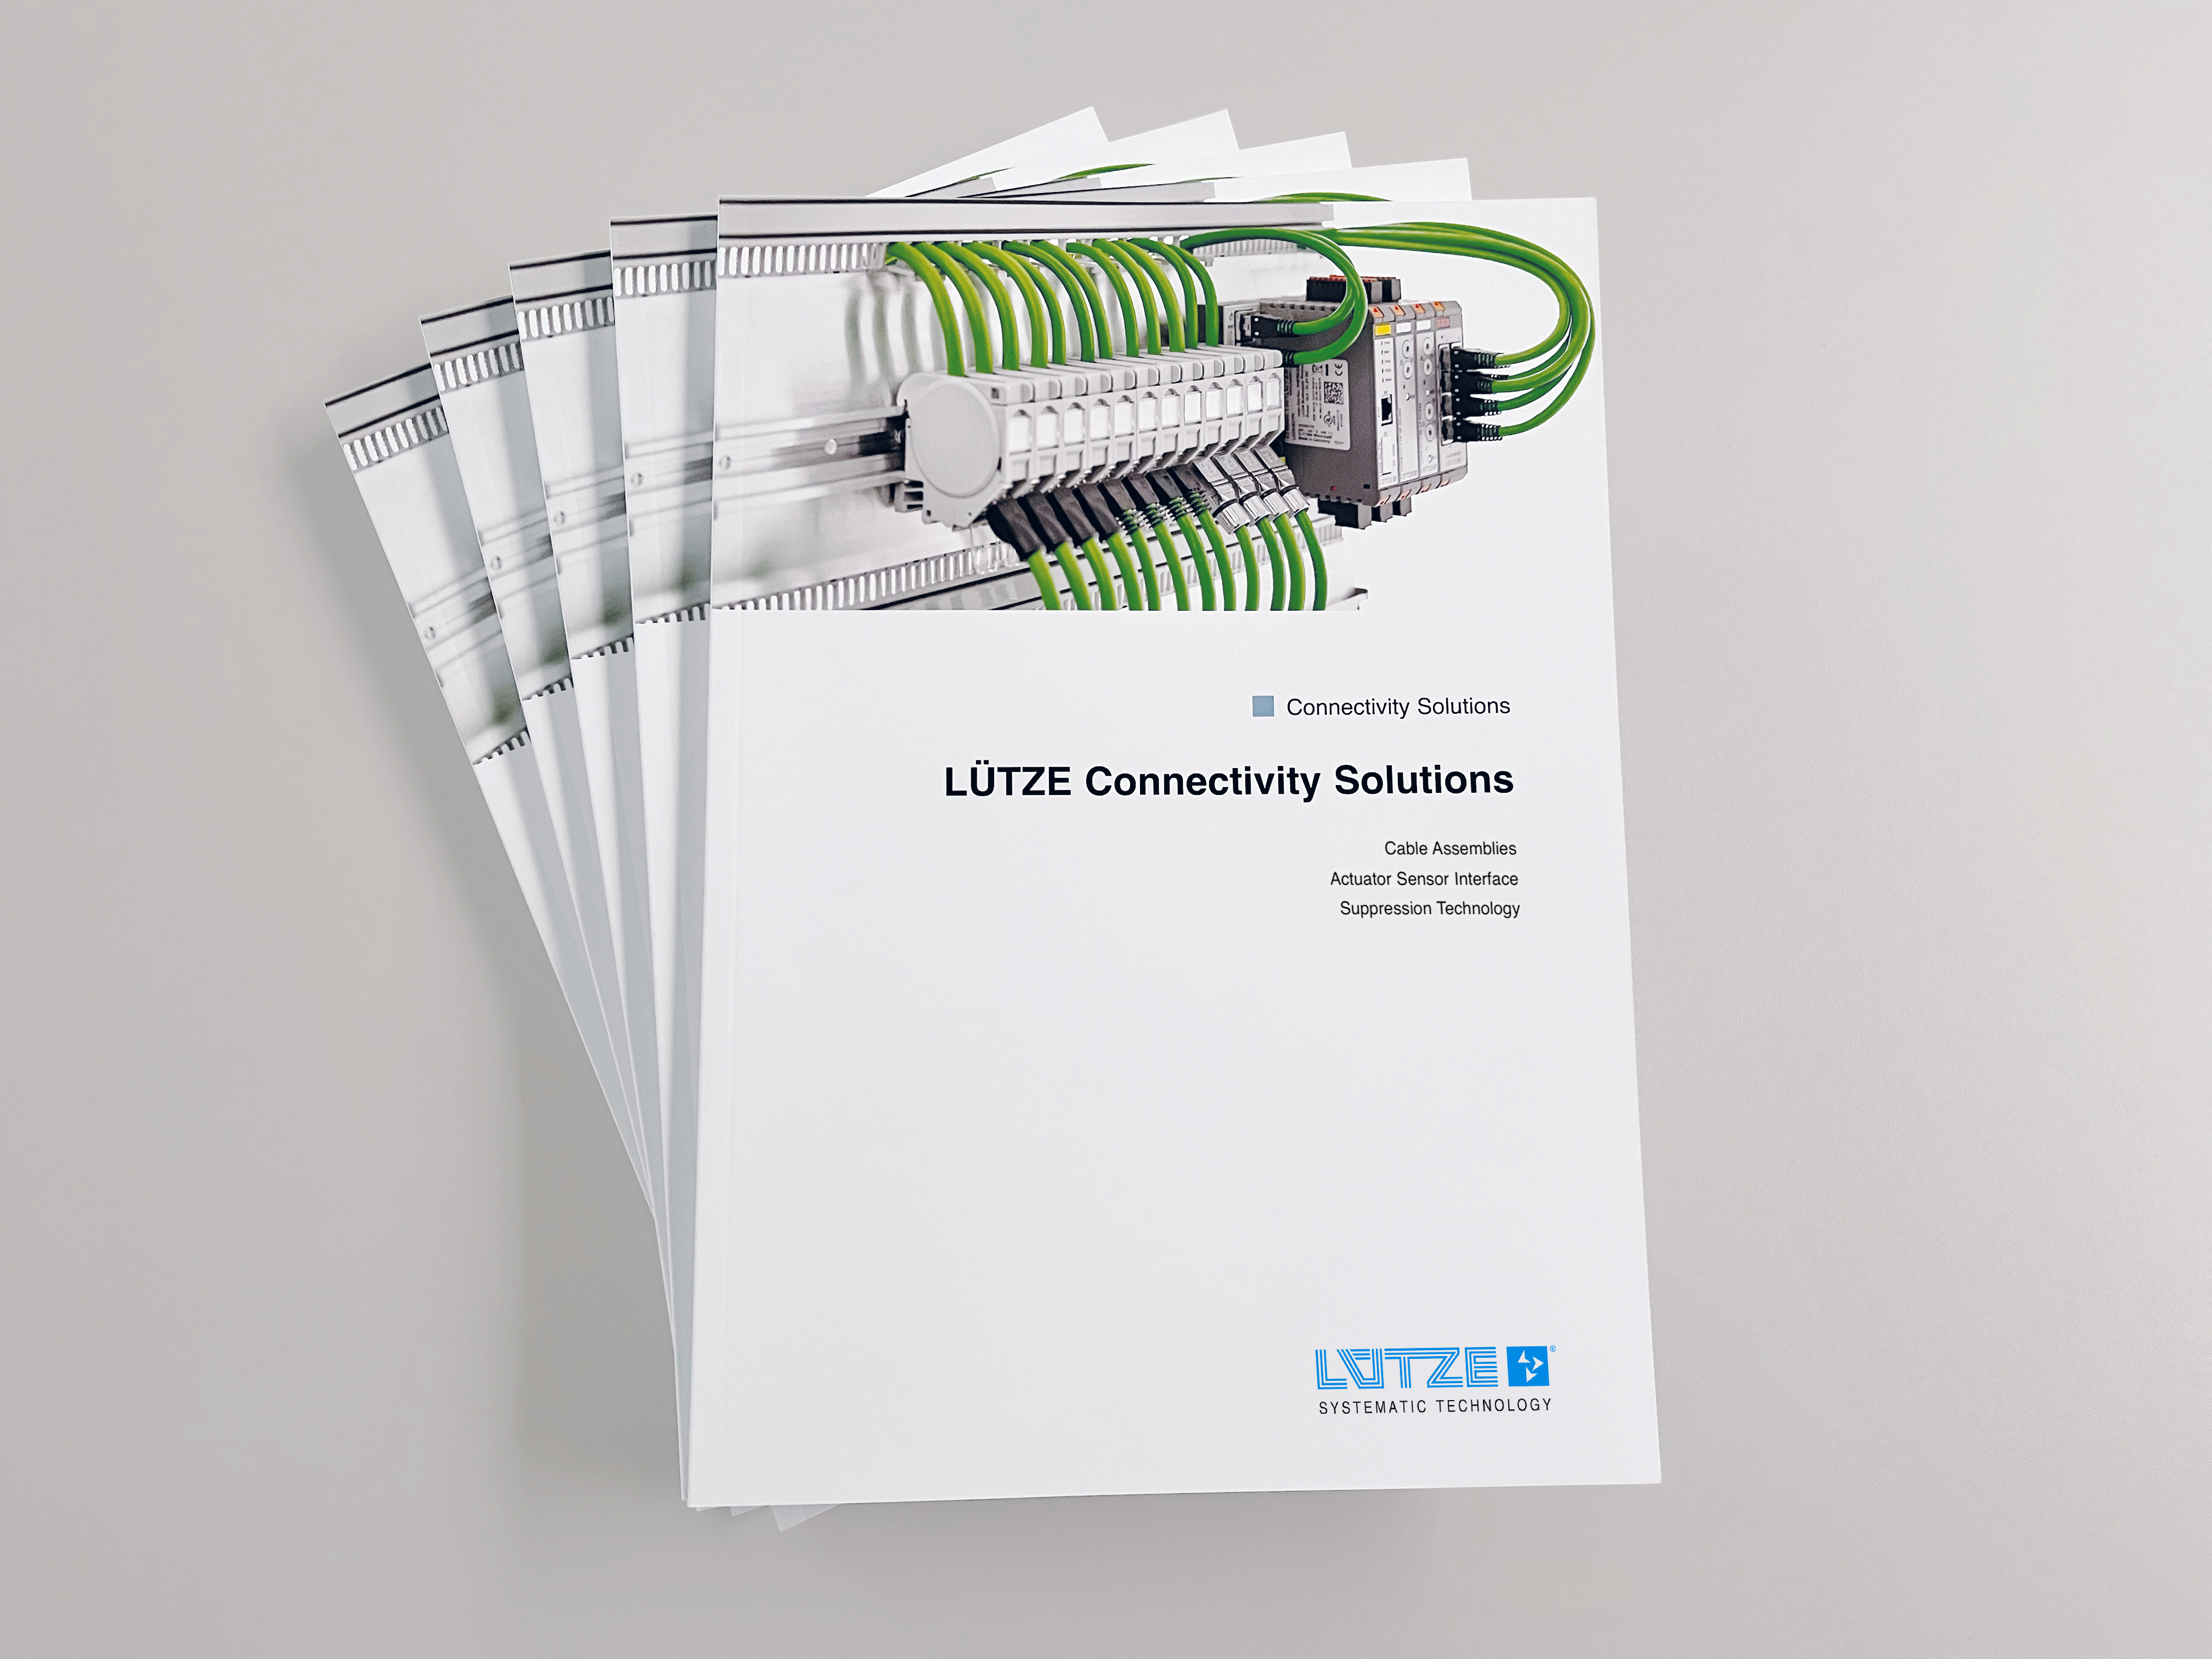 The new LÜTZE Connectivity Solutions Catalogue 2022